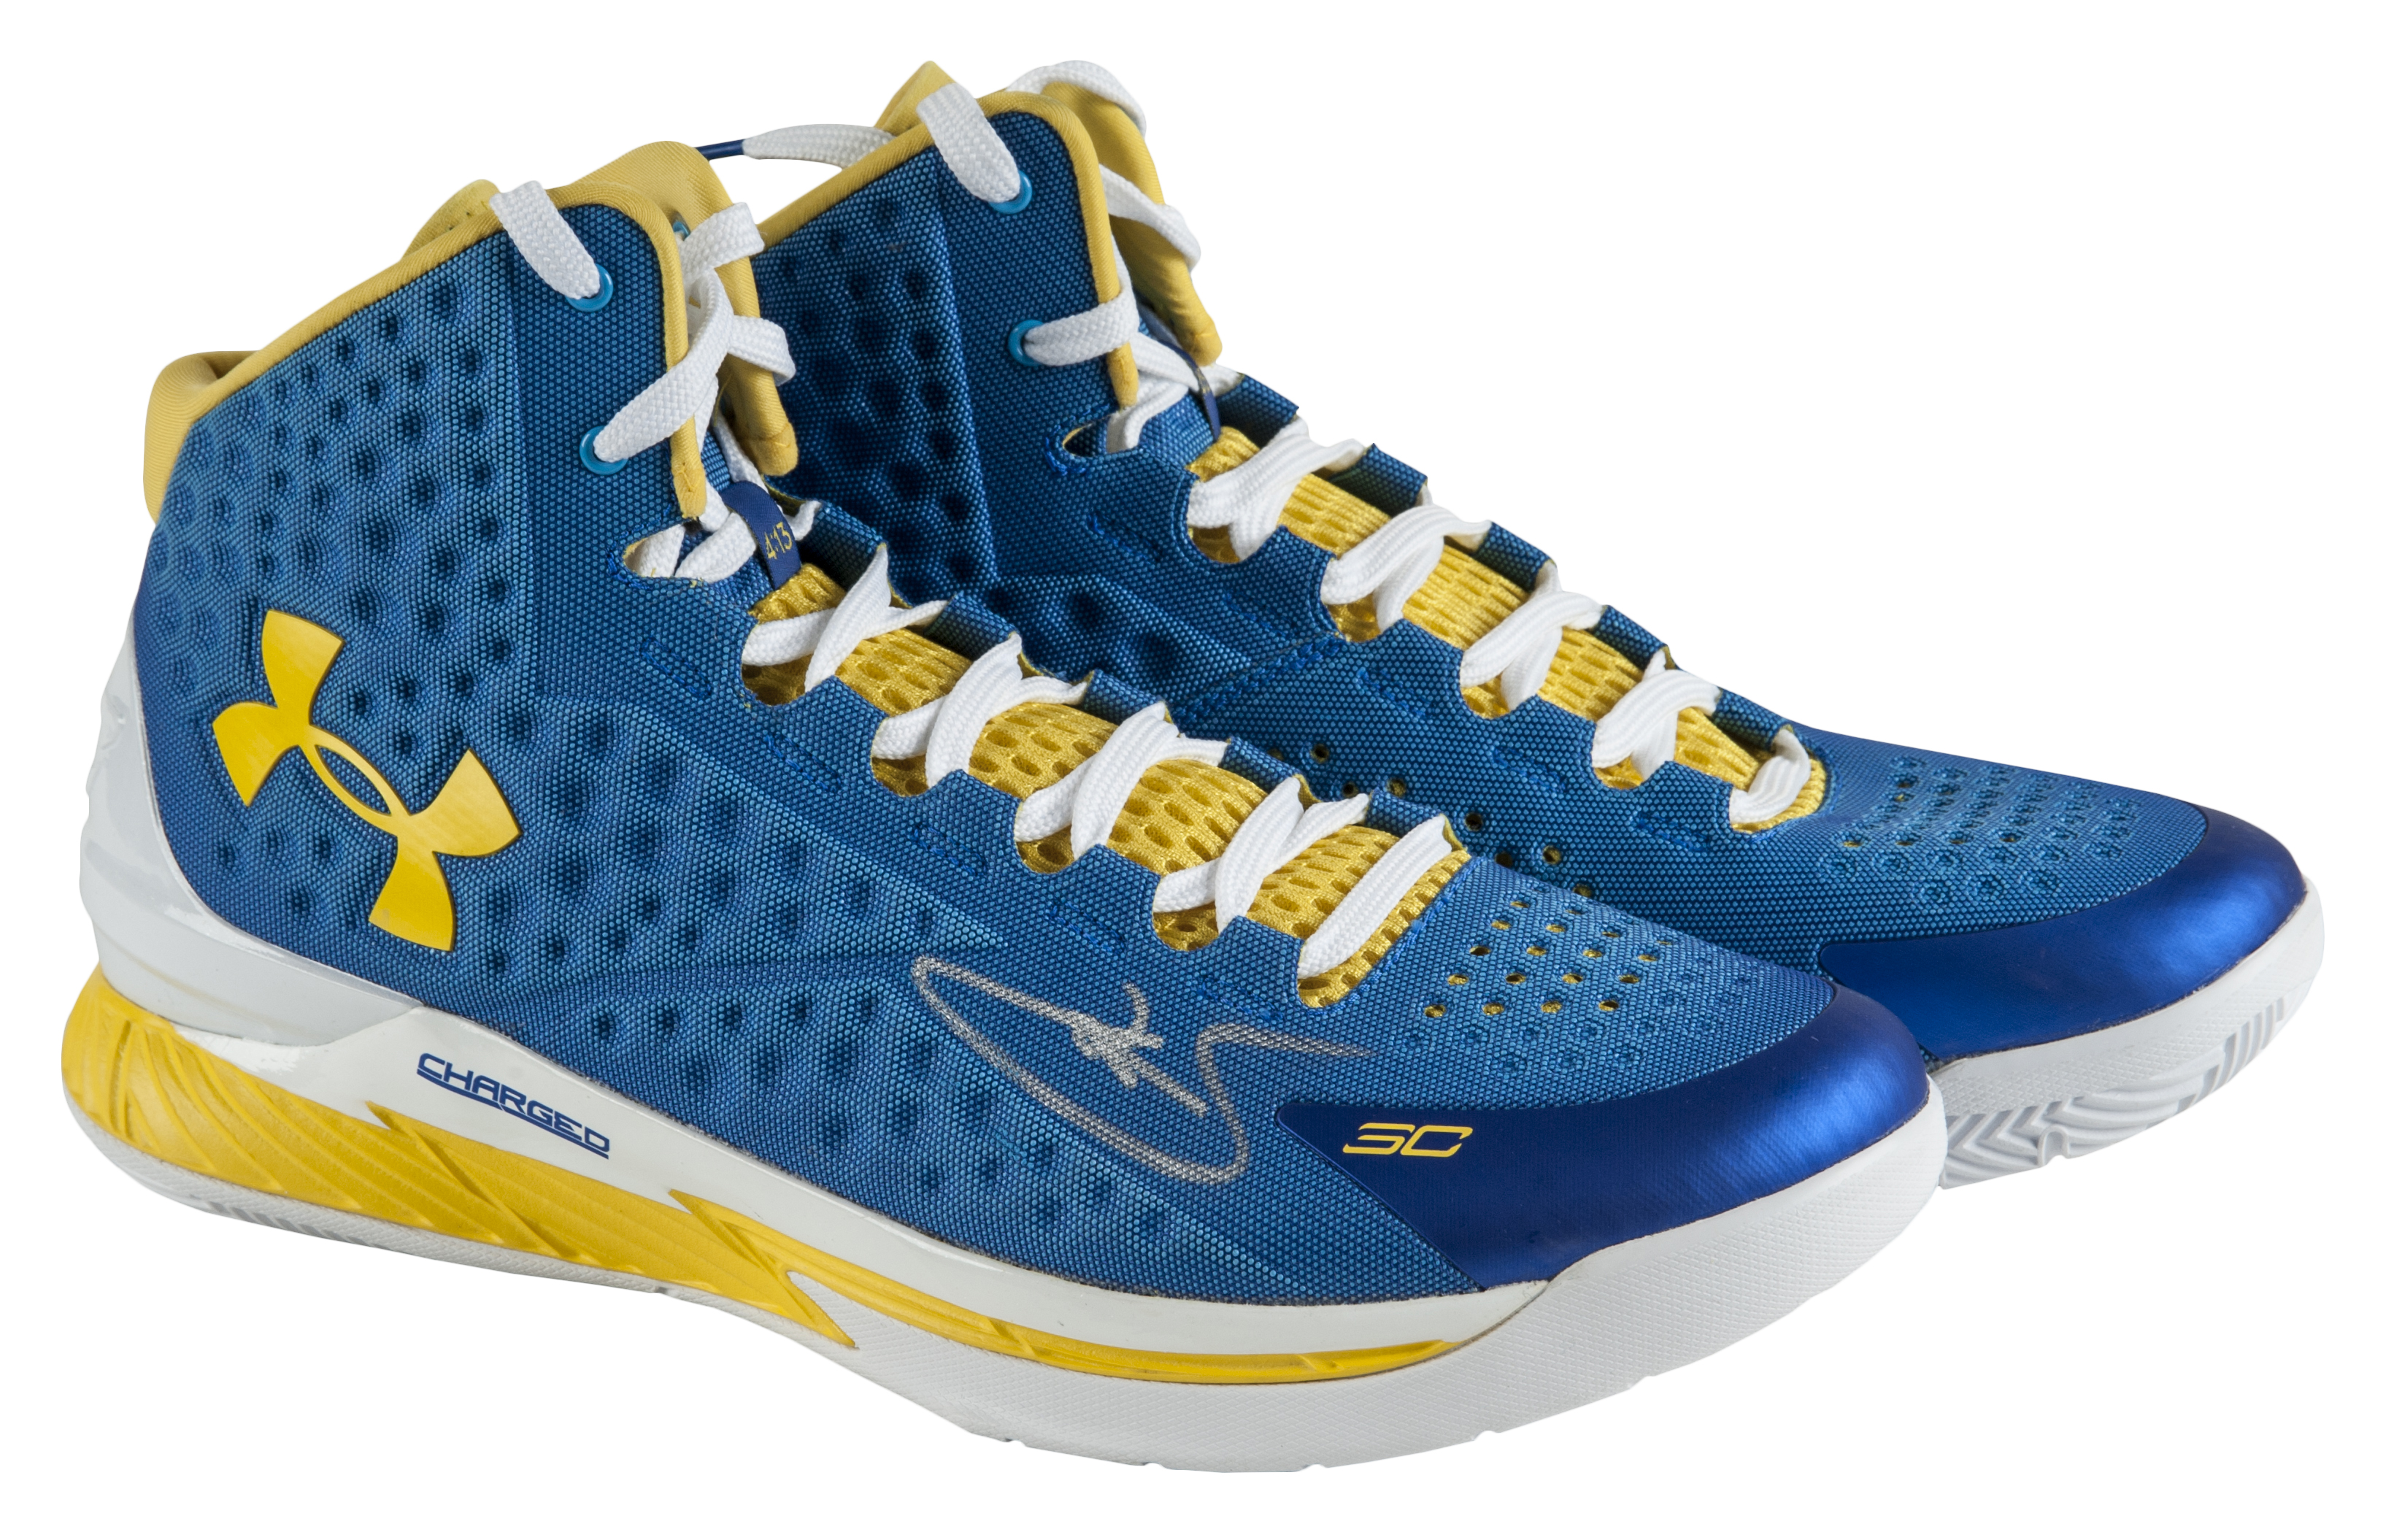 Stephen Curry Wears Under Armour Curry 3 to Practice